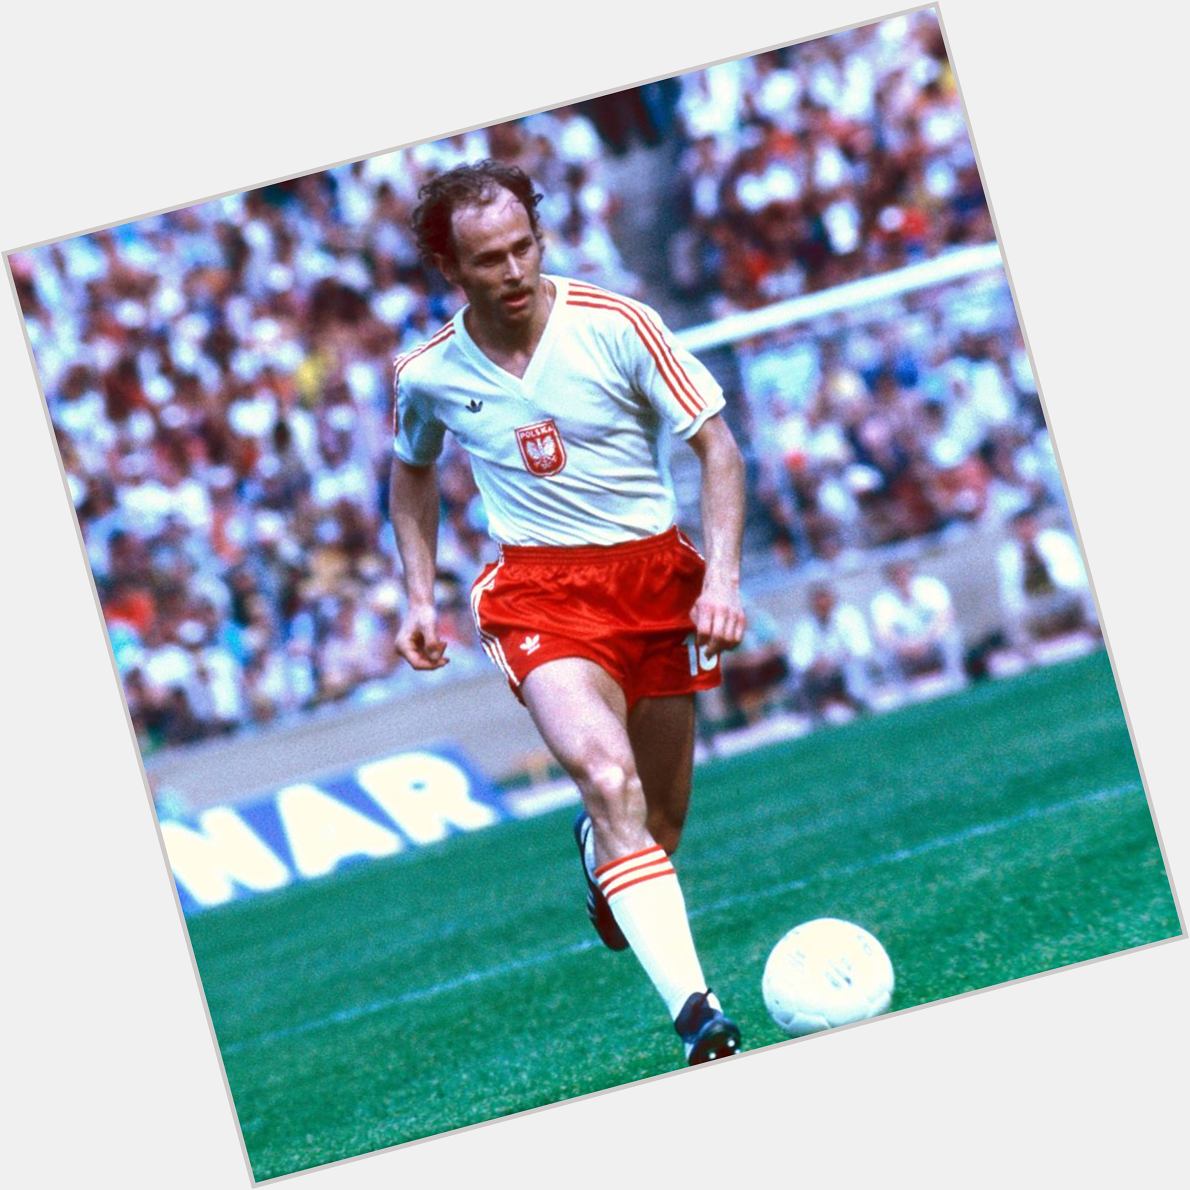 FIFAWorldCup \"     Happy Birthday, Grzegorz Lato!
Winner of the adidas Golden Boot at the 1974  